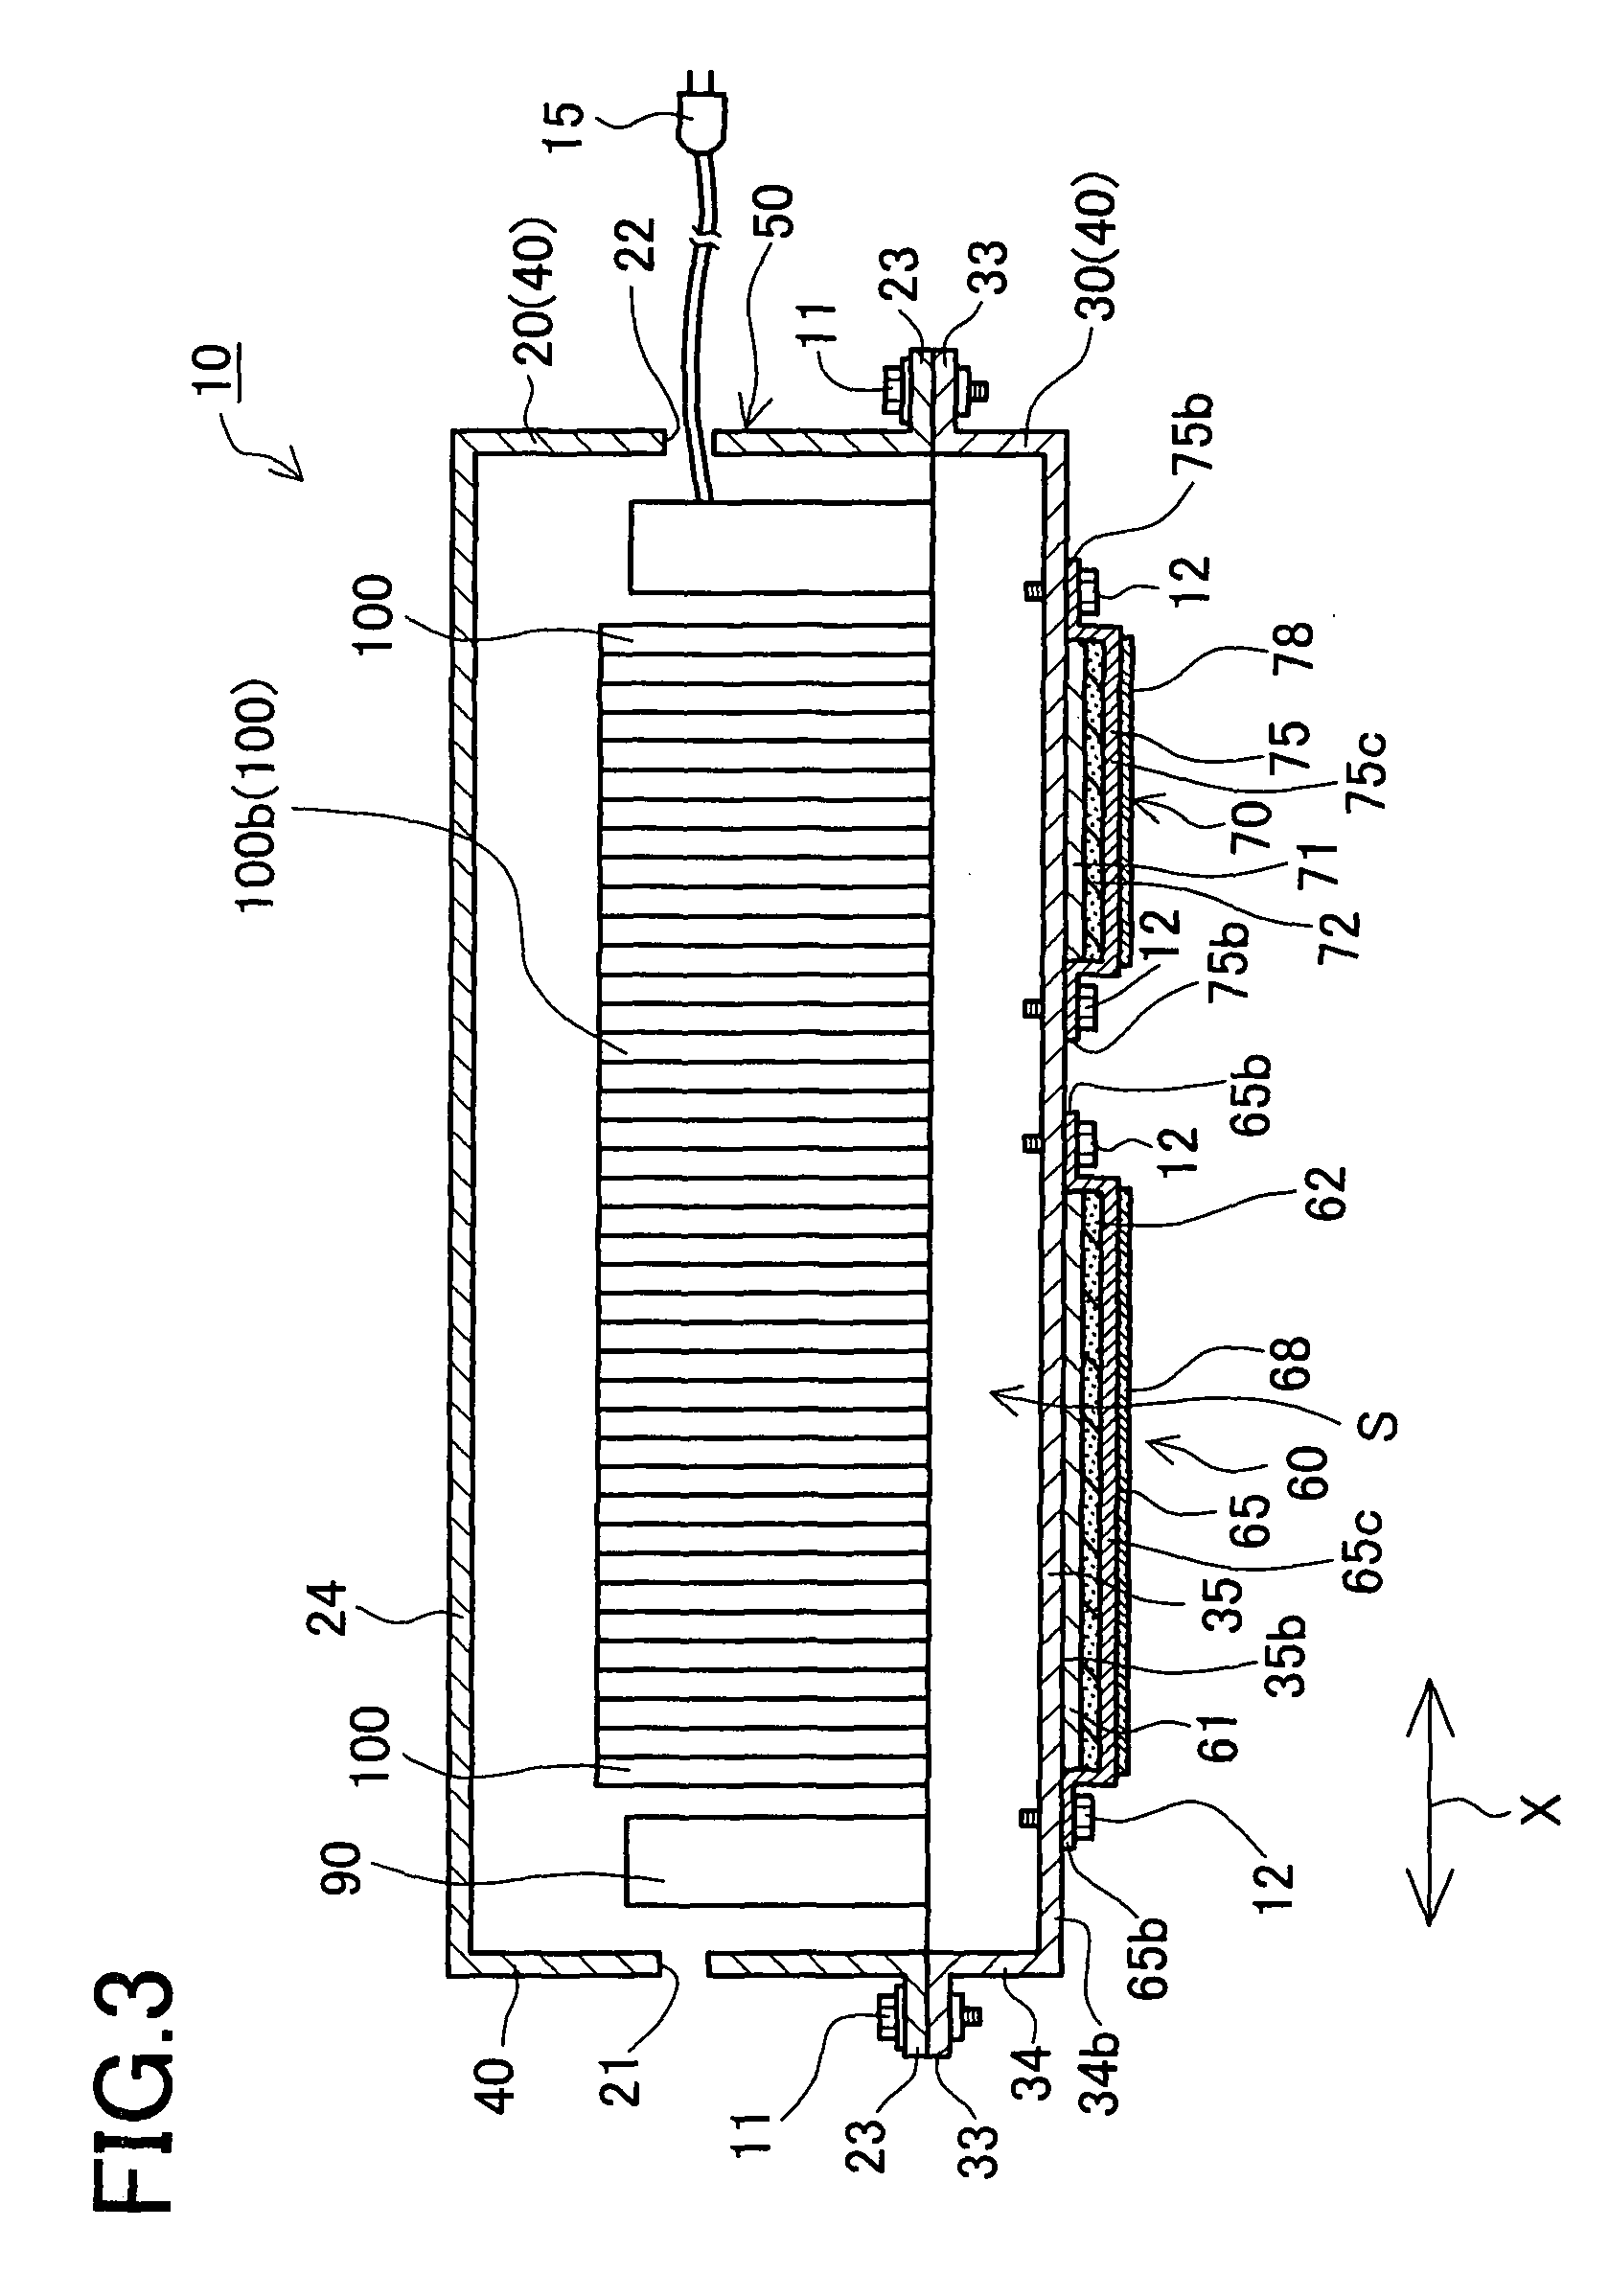 Heater unit and battery structure with heater